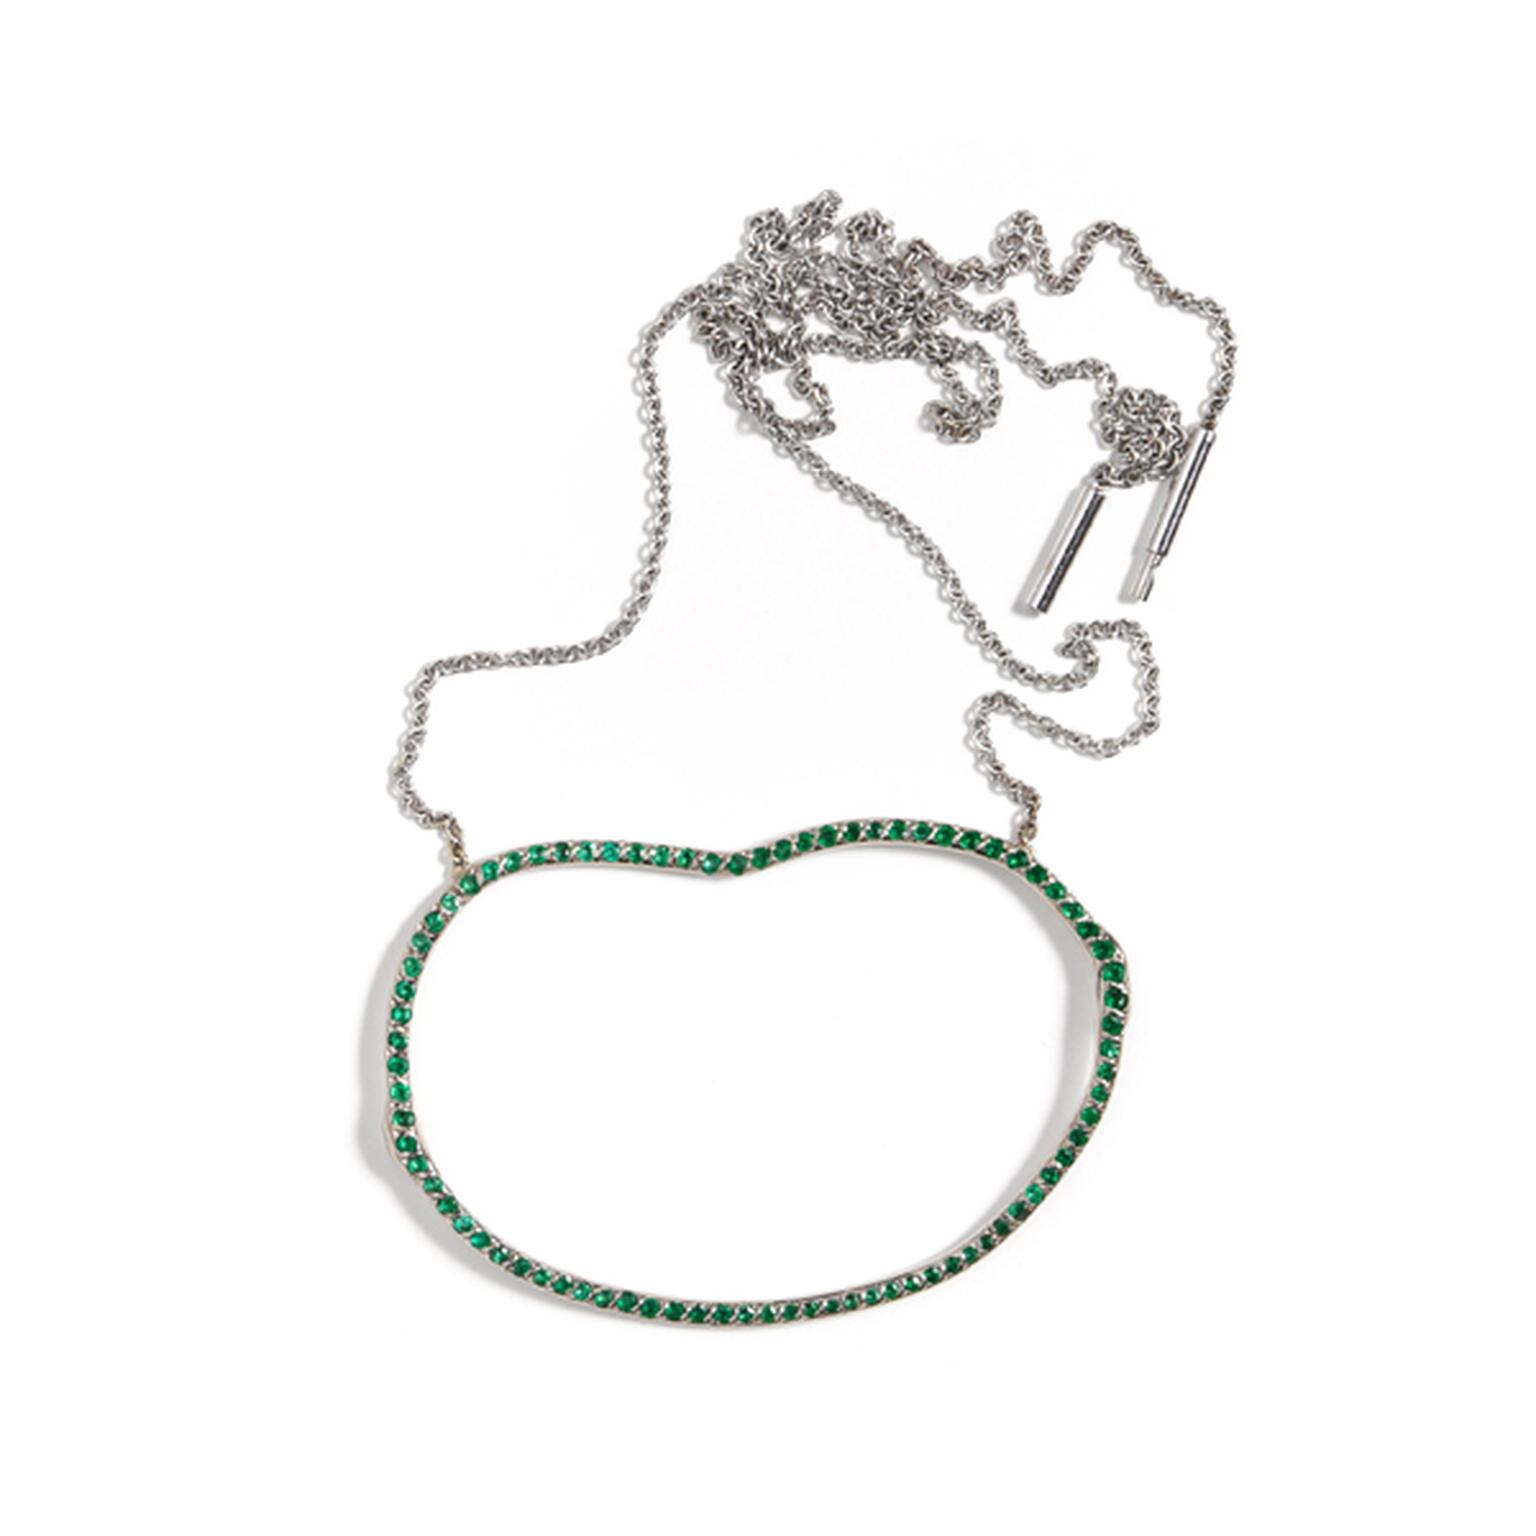 Alexandra Jefford's "negative space" emerald necklace celebrates simplicity and organic forms (available at kultia.com).